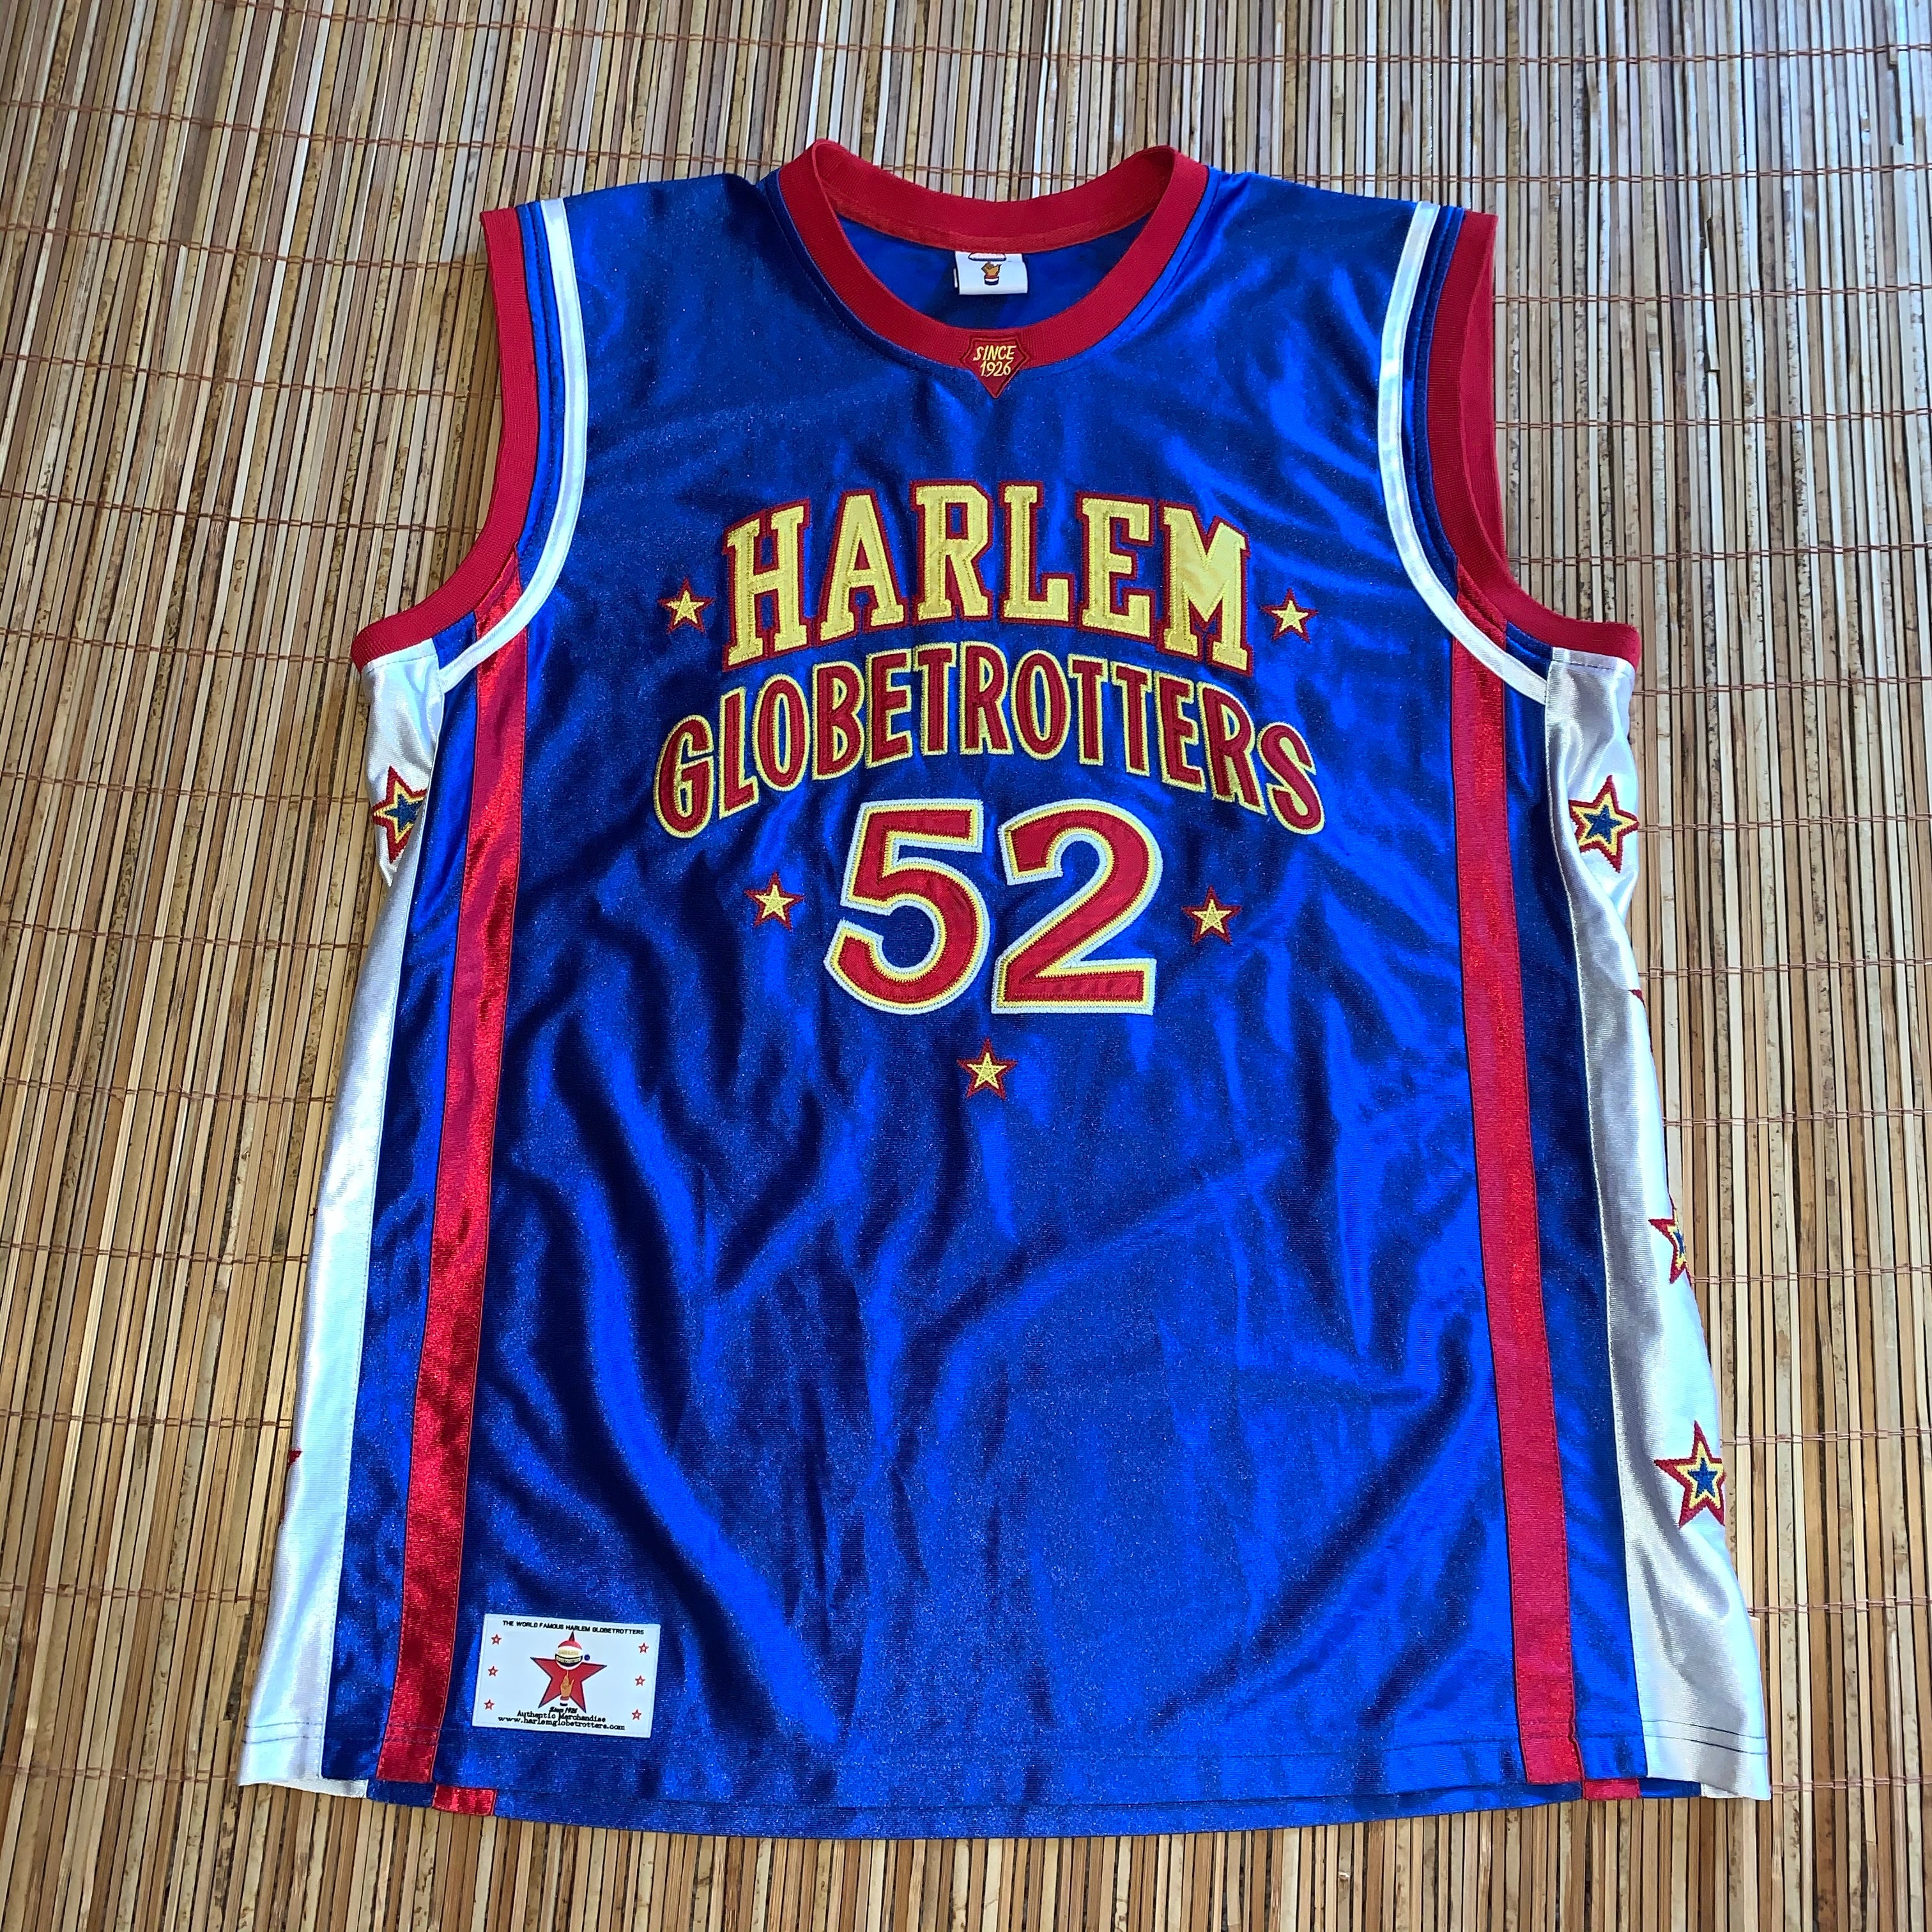 Victorious Harlem Basketball Jersey 212 Pink Sz XL autographed